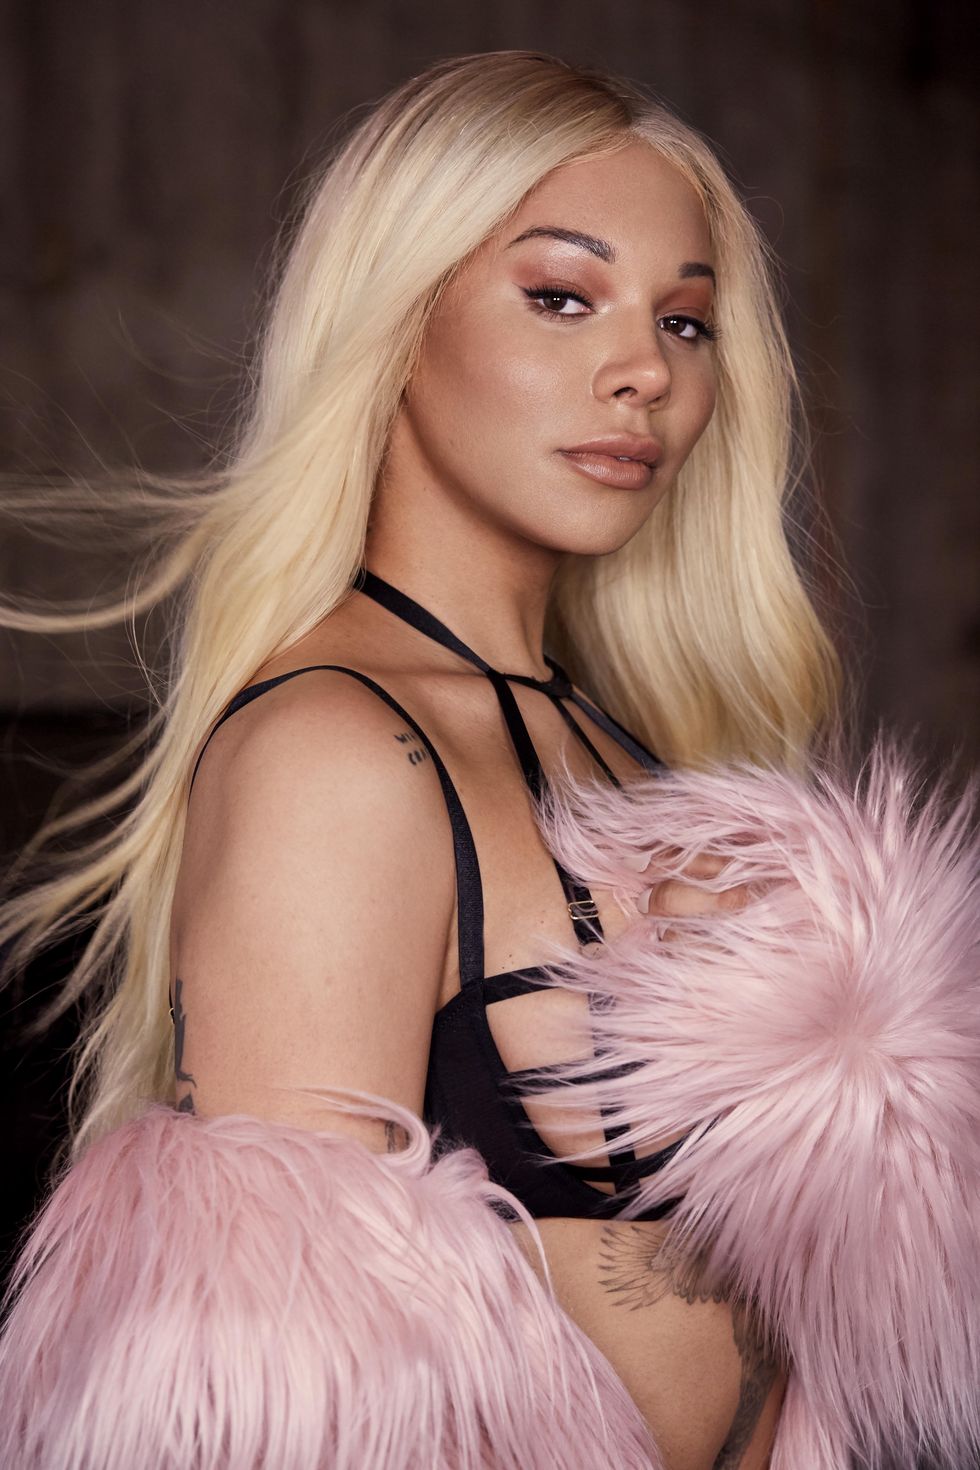 Munroe Bergdorf Is The Face Of A Lingerie Campaign